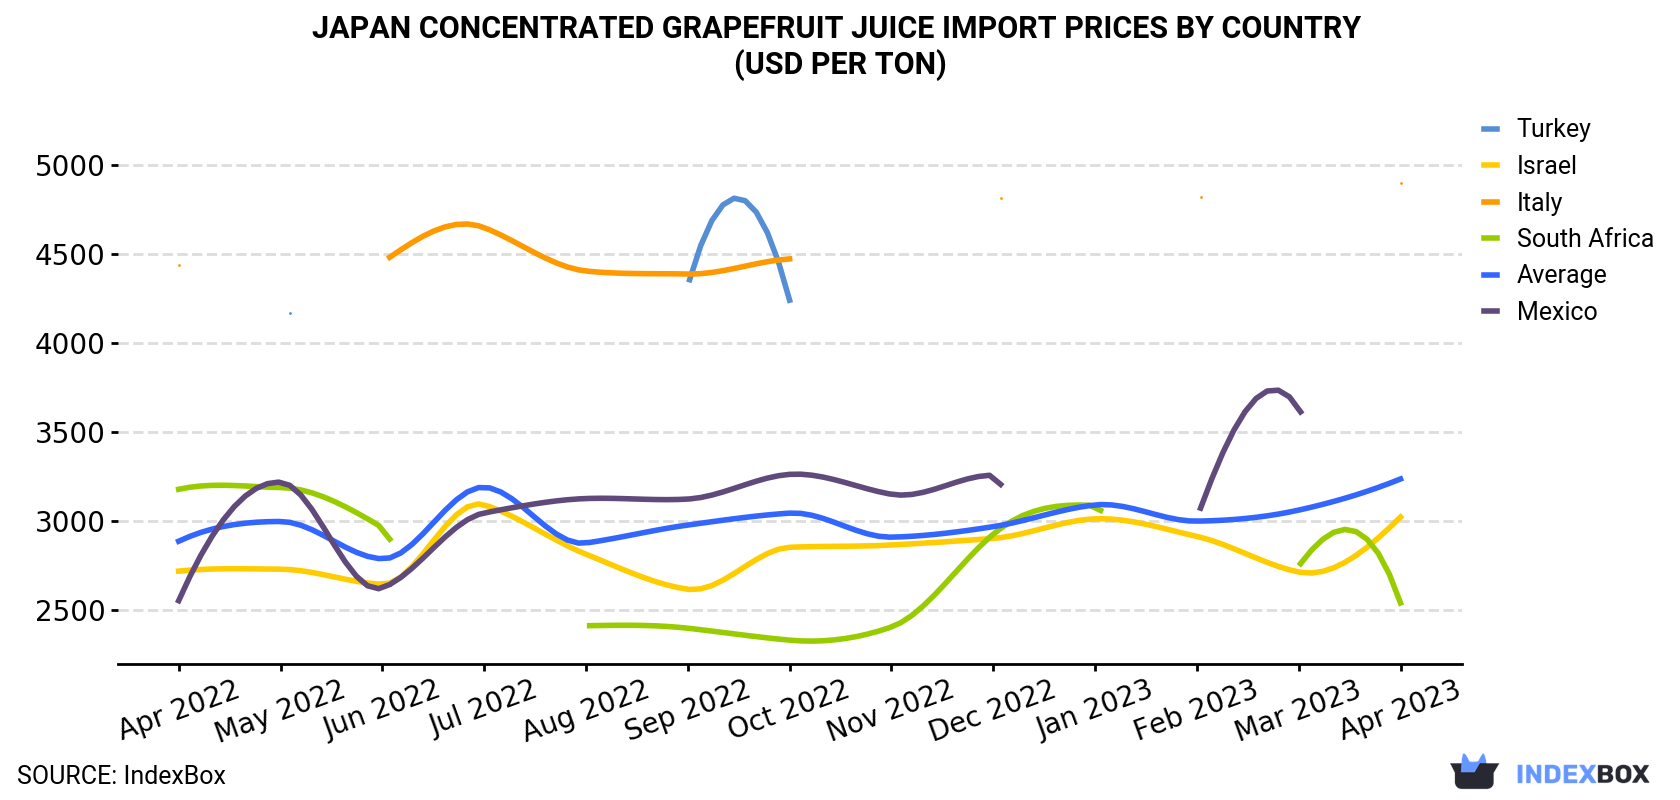 Japan Concentrated Grapefruit Juice Import Prices By Country (USD Per Ton)